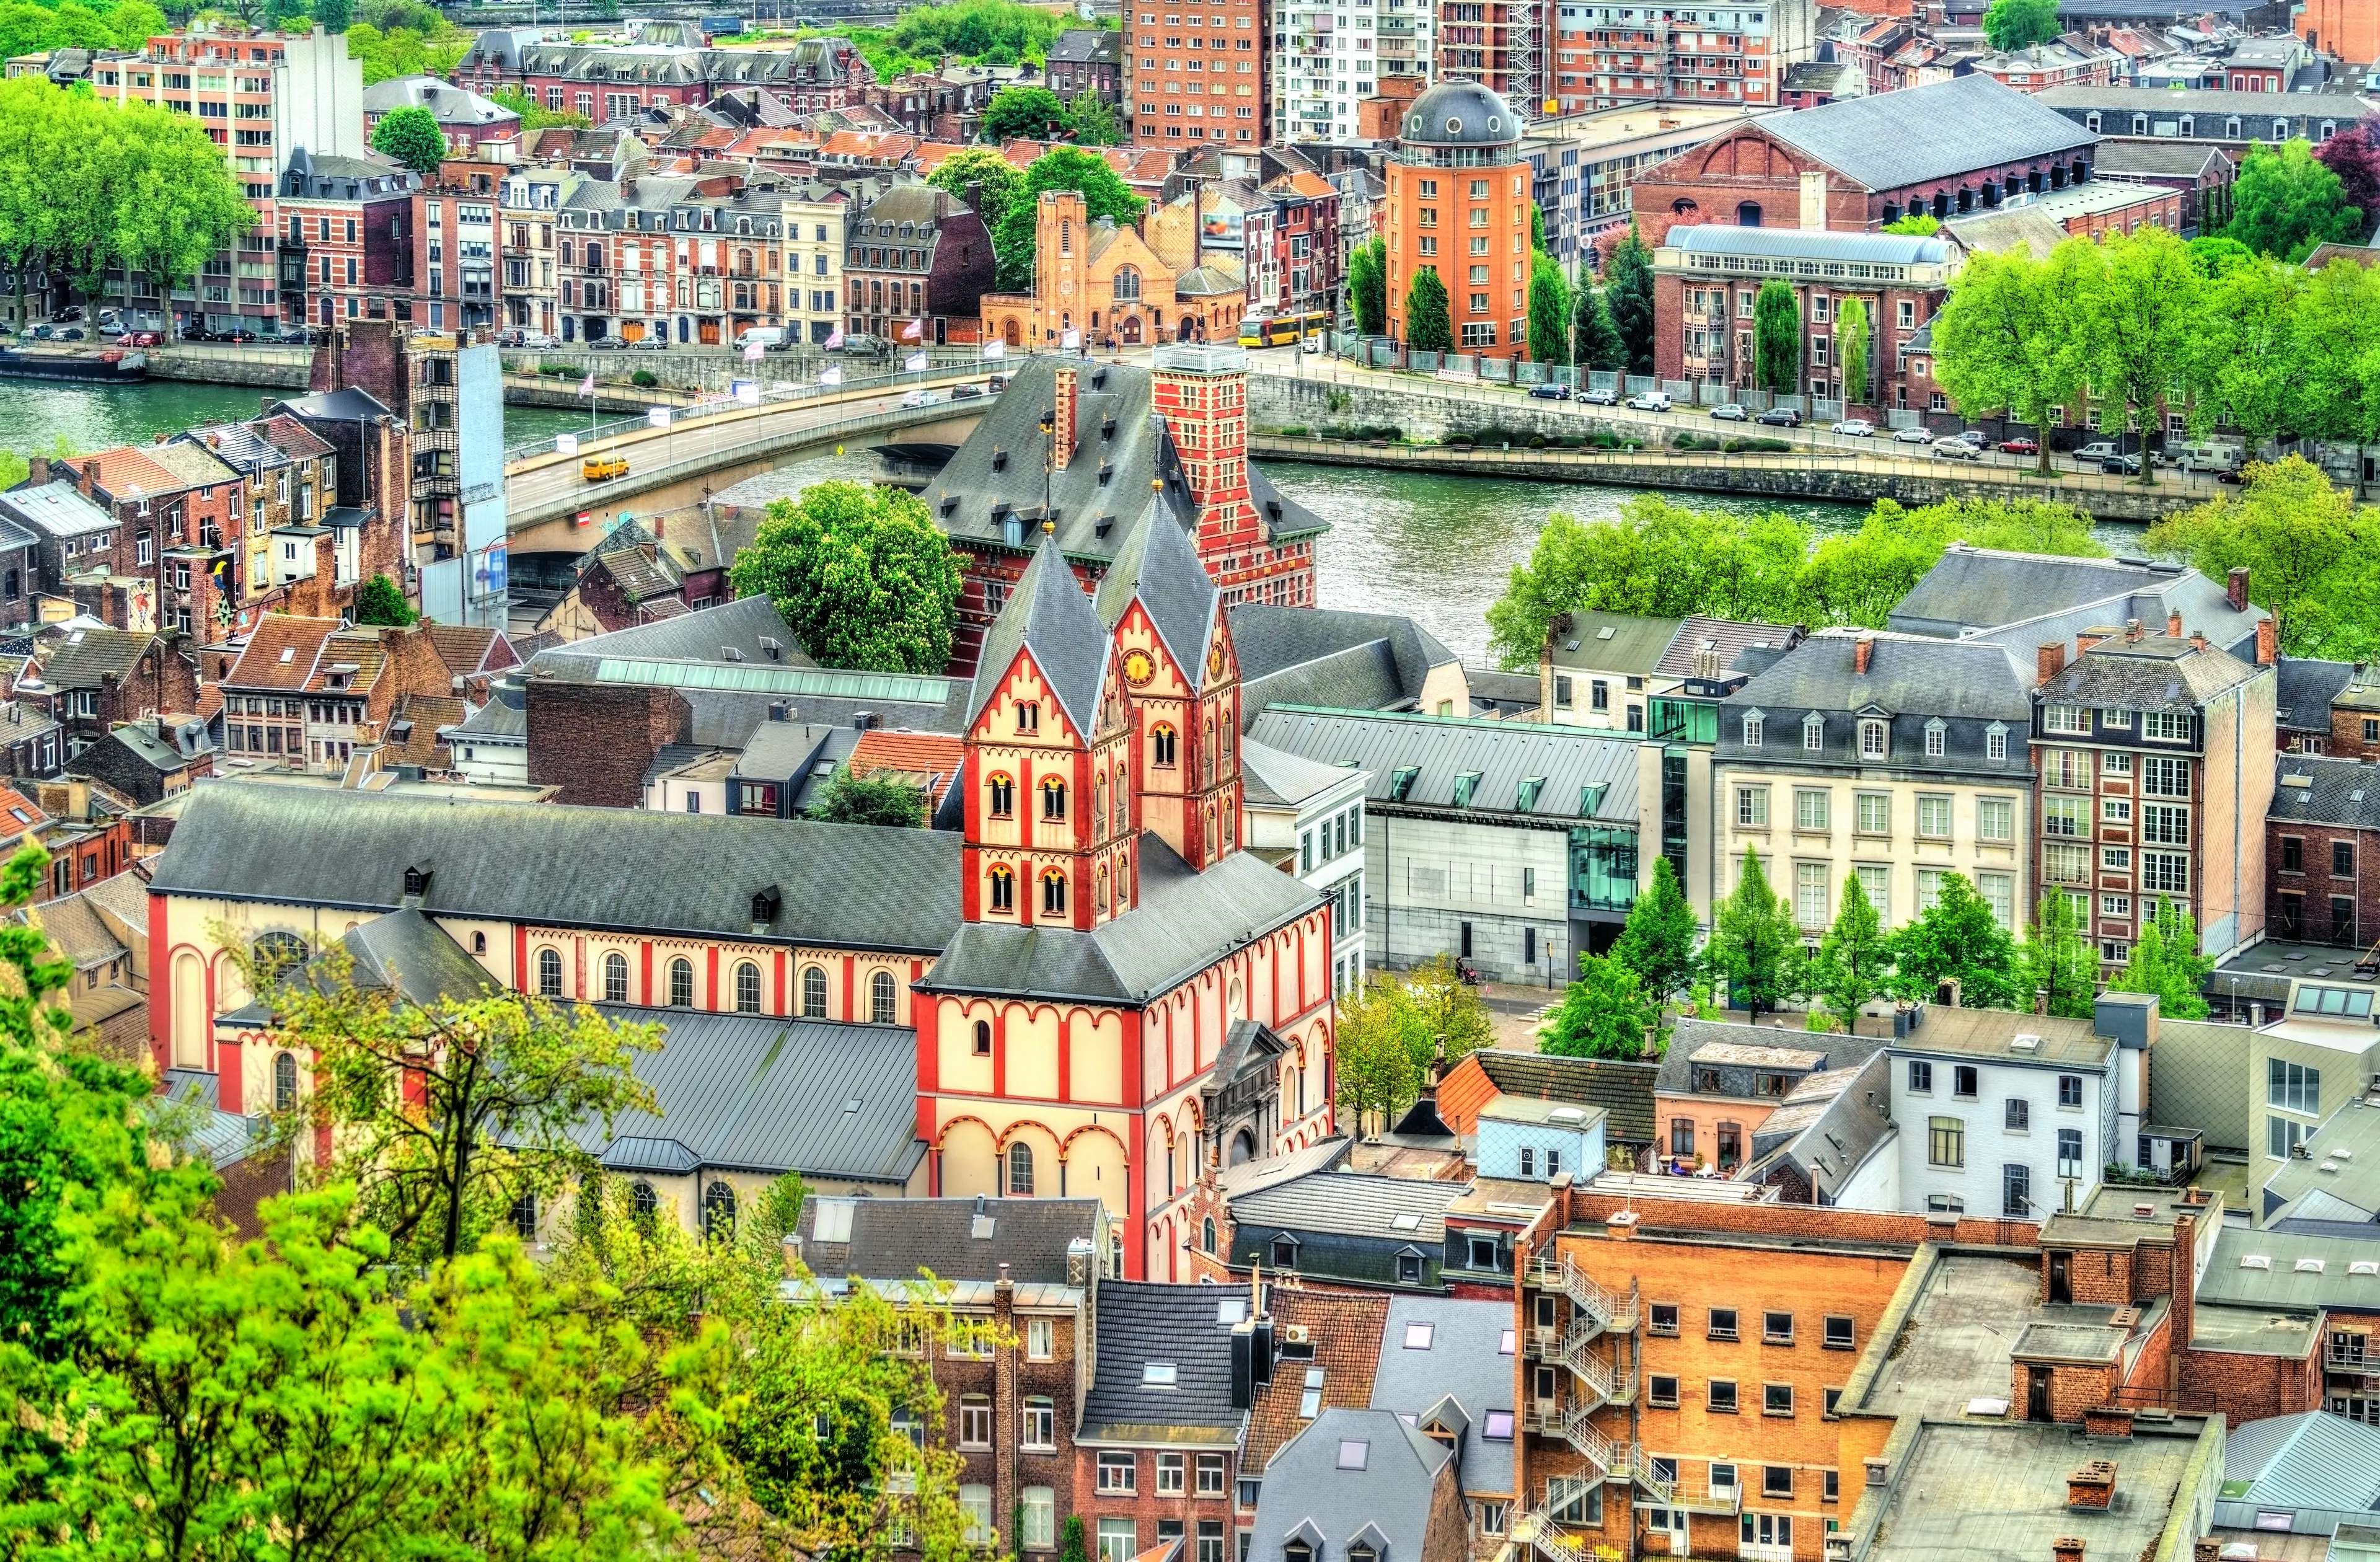 Panoramic view of the city of Liege, dominated by the Collegiate Church of St. Bartholomew